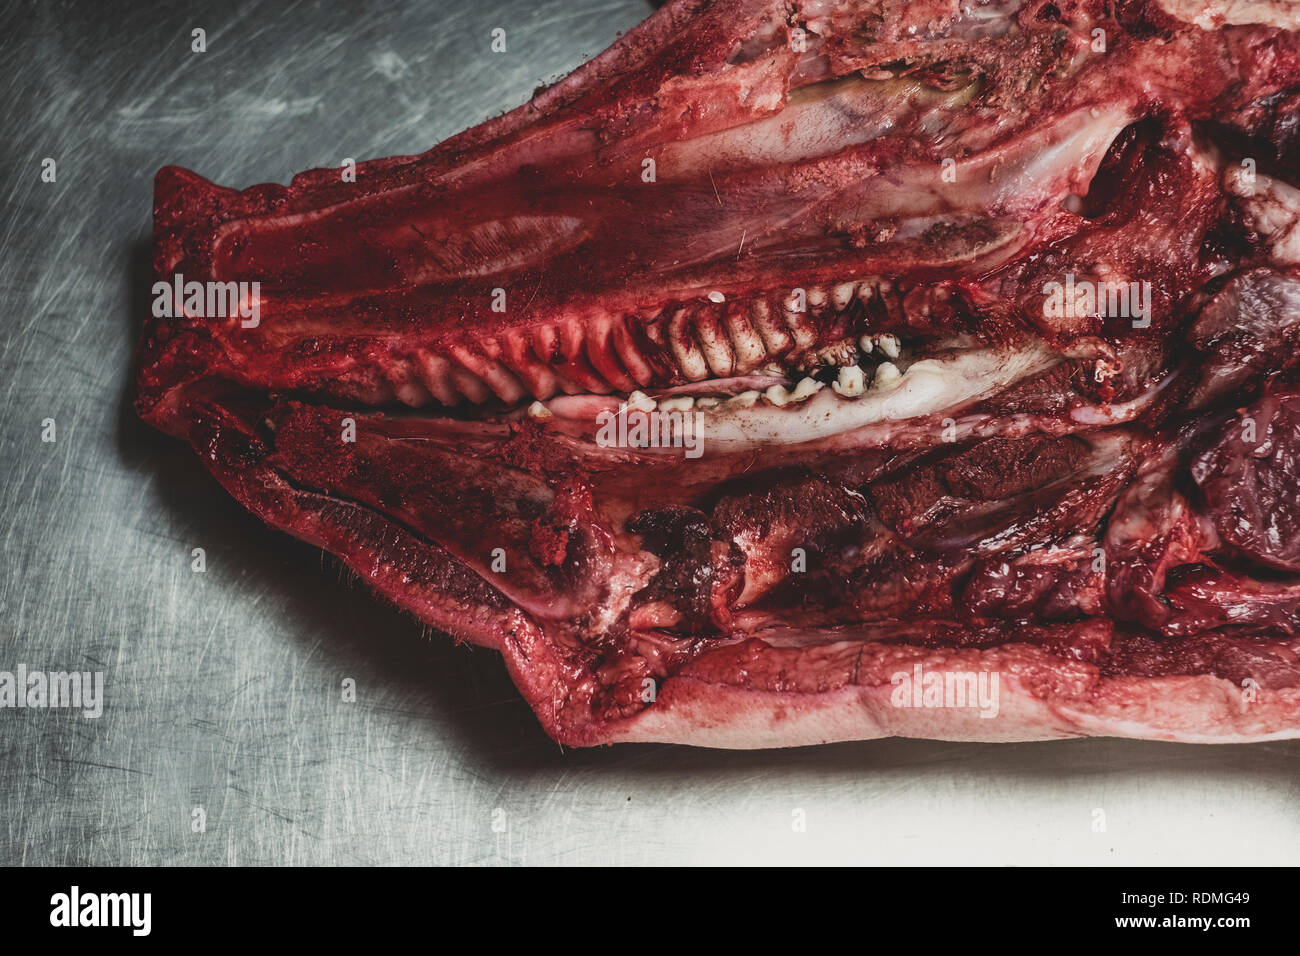 High angle close up of pig carcass, cross section of animal head. Stock Photo